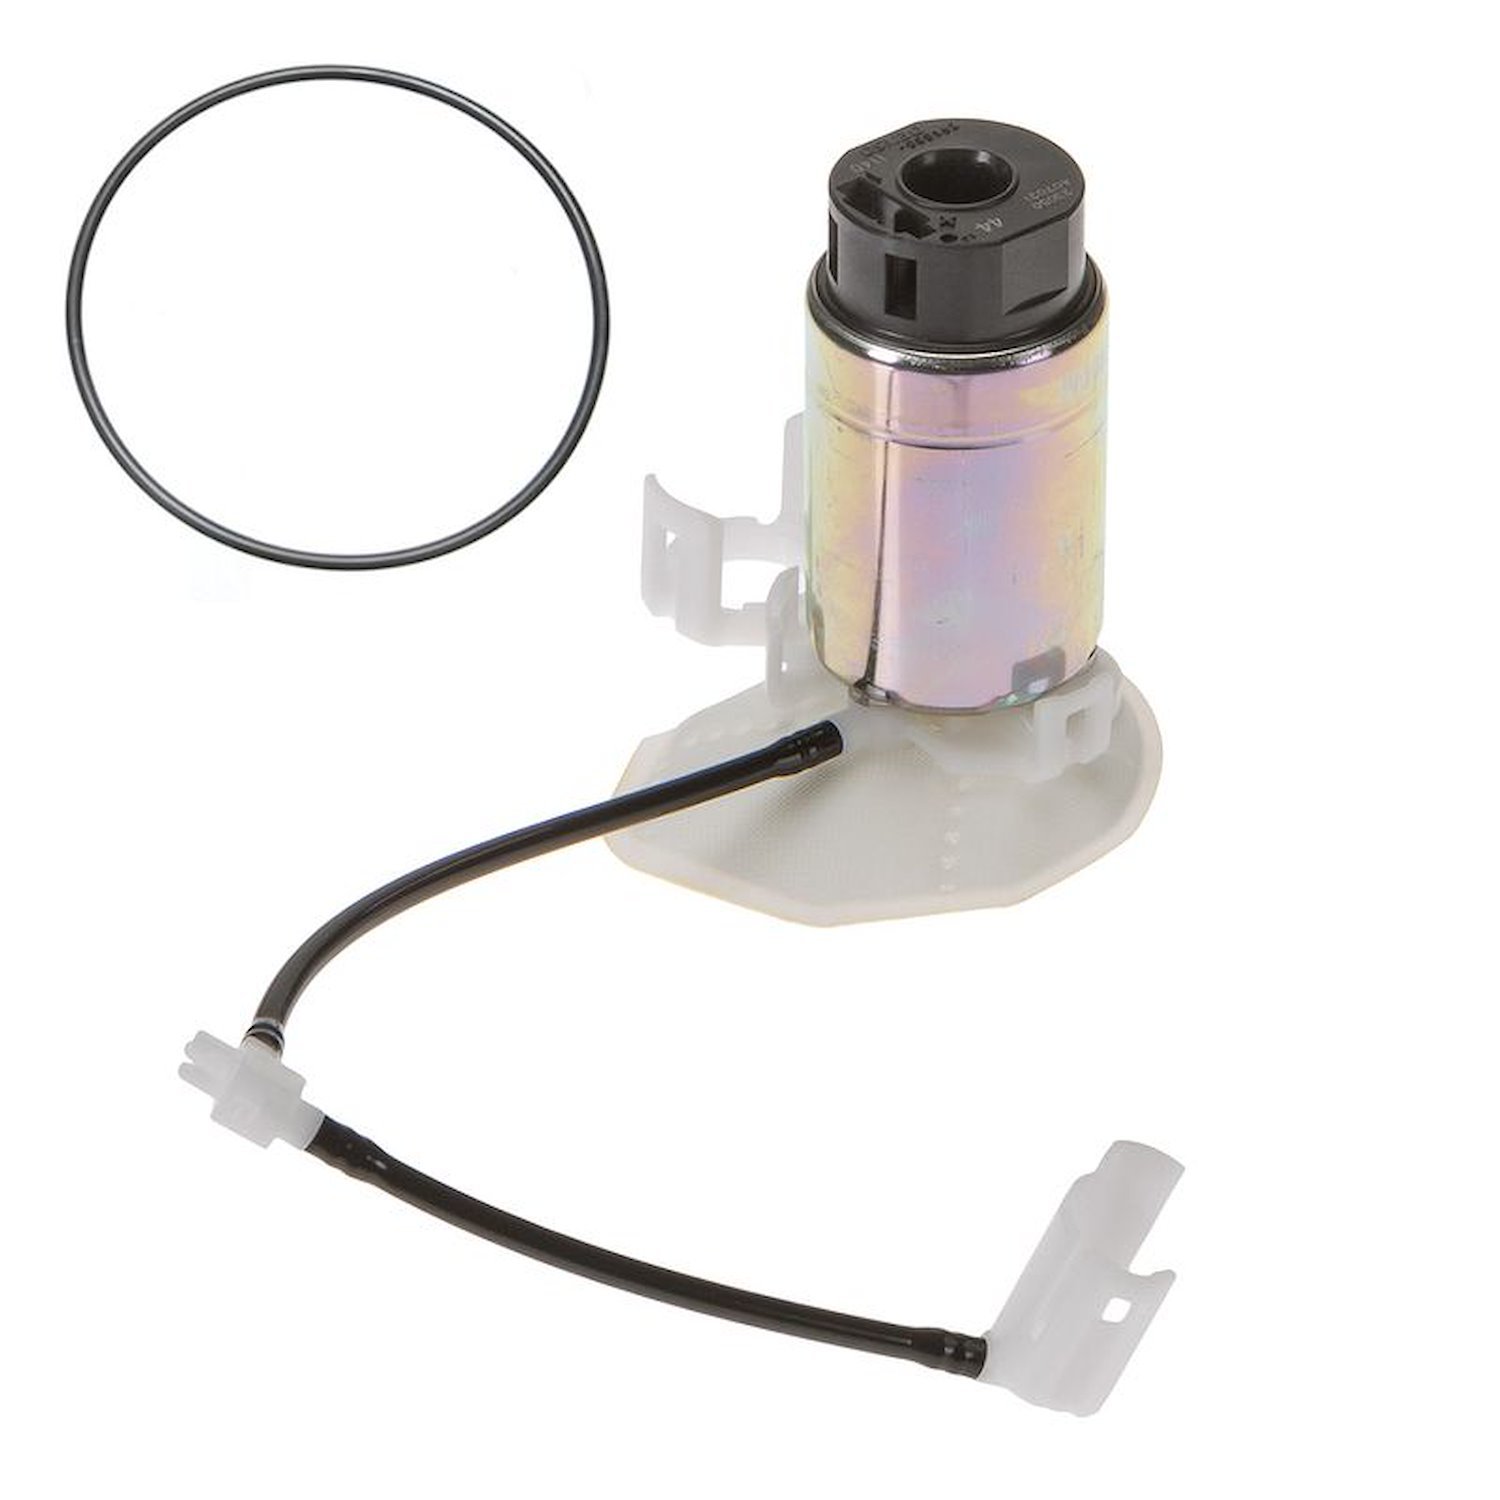 EFI In-Tank Electric Fuel Pump and Strainer Set for 2009-2013 Toyota Corolla/Matrix